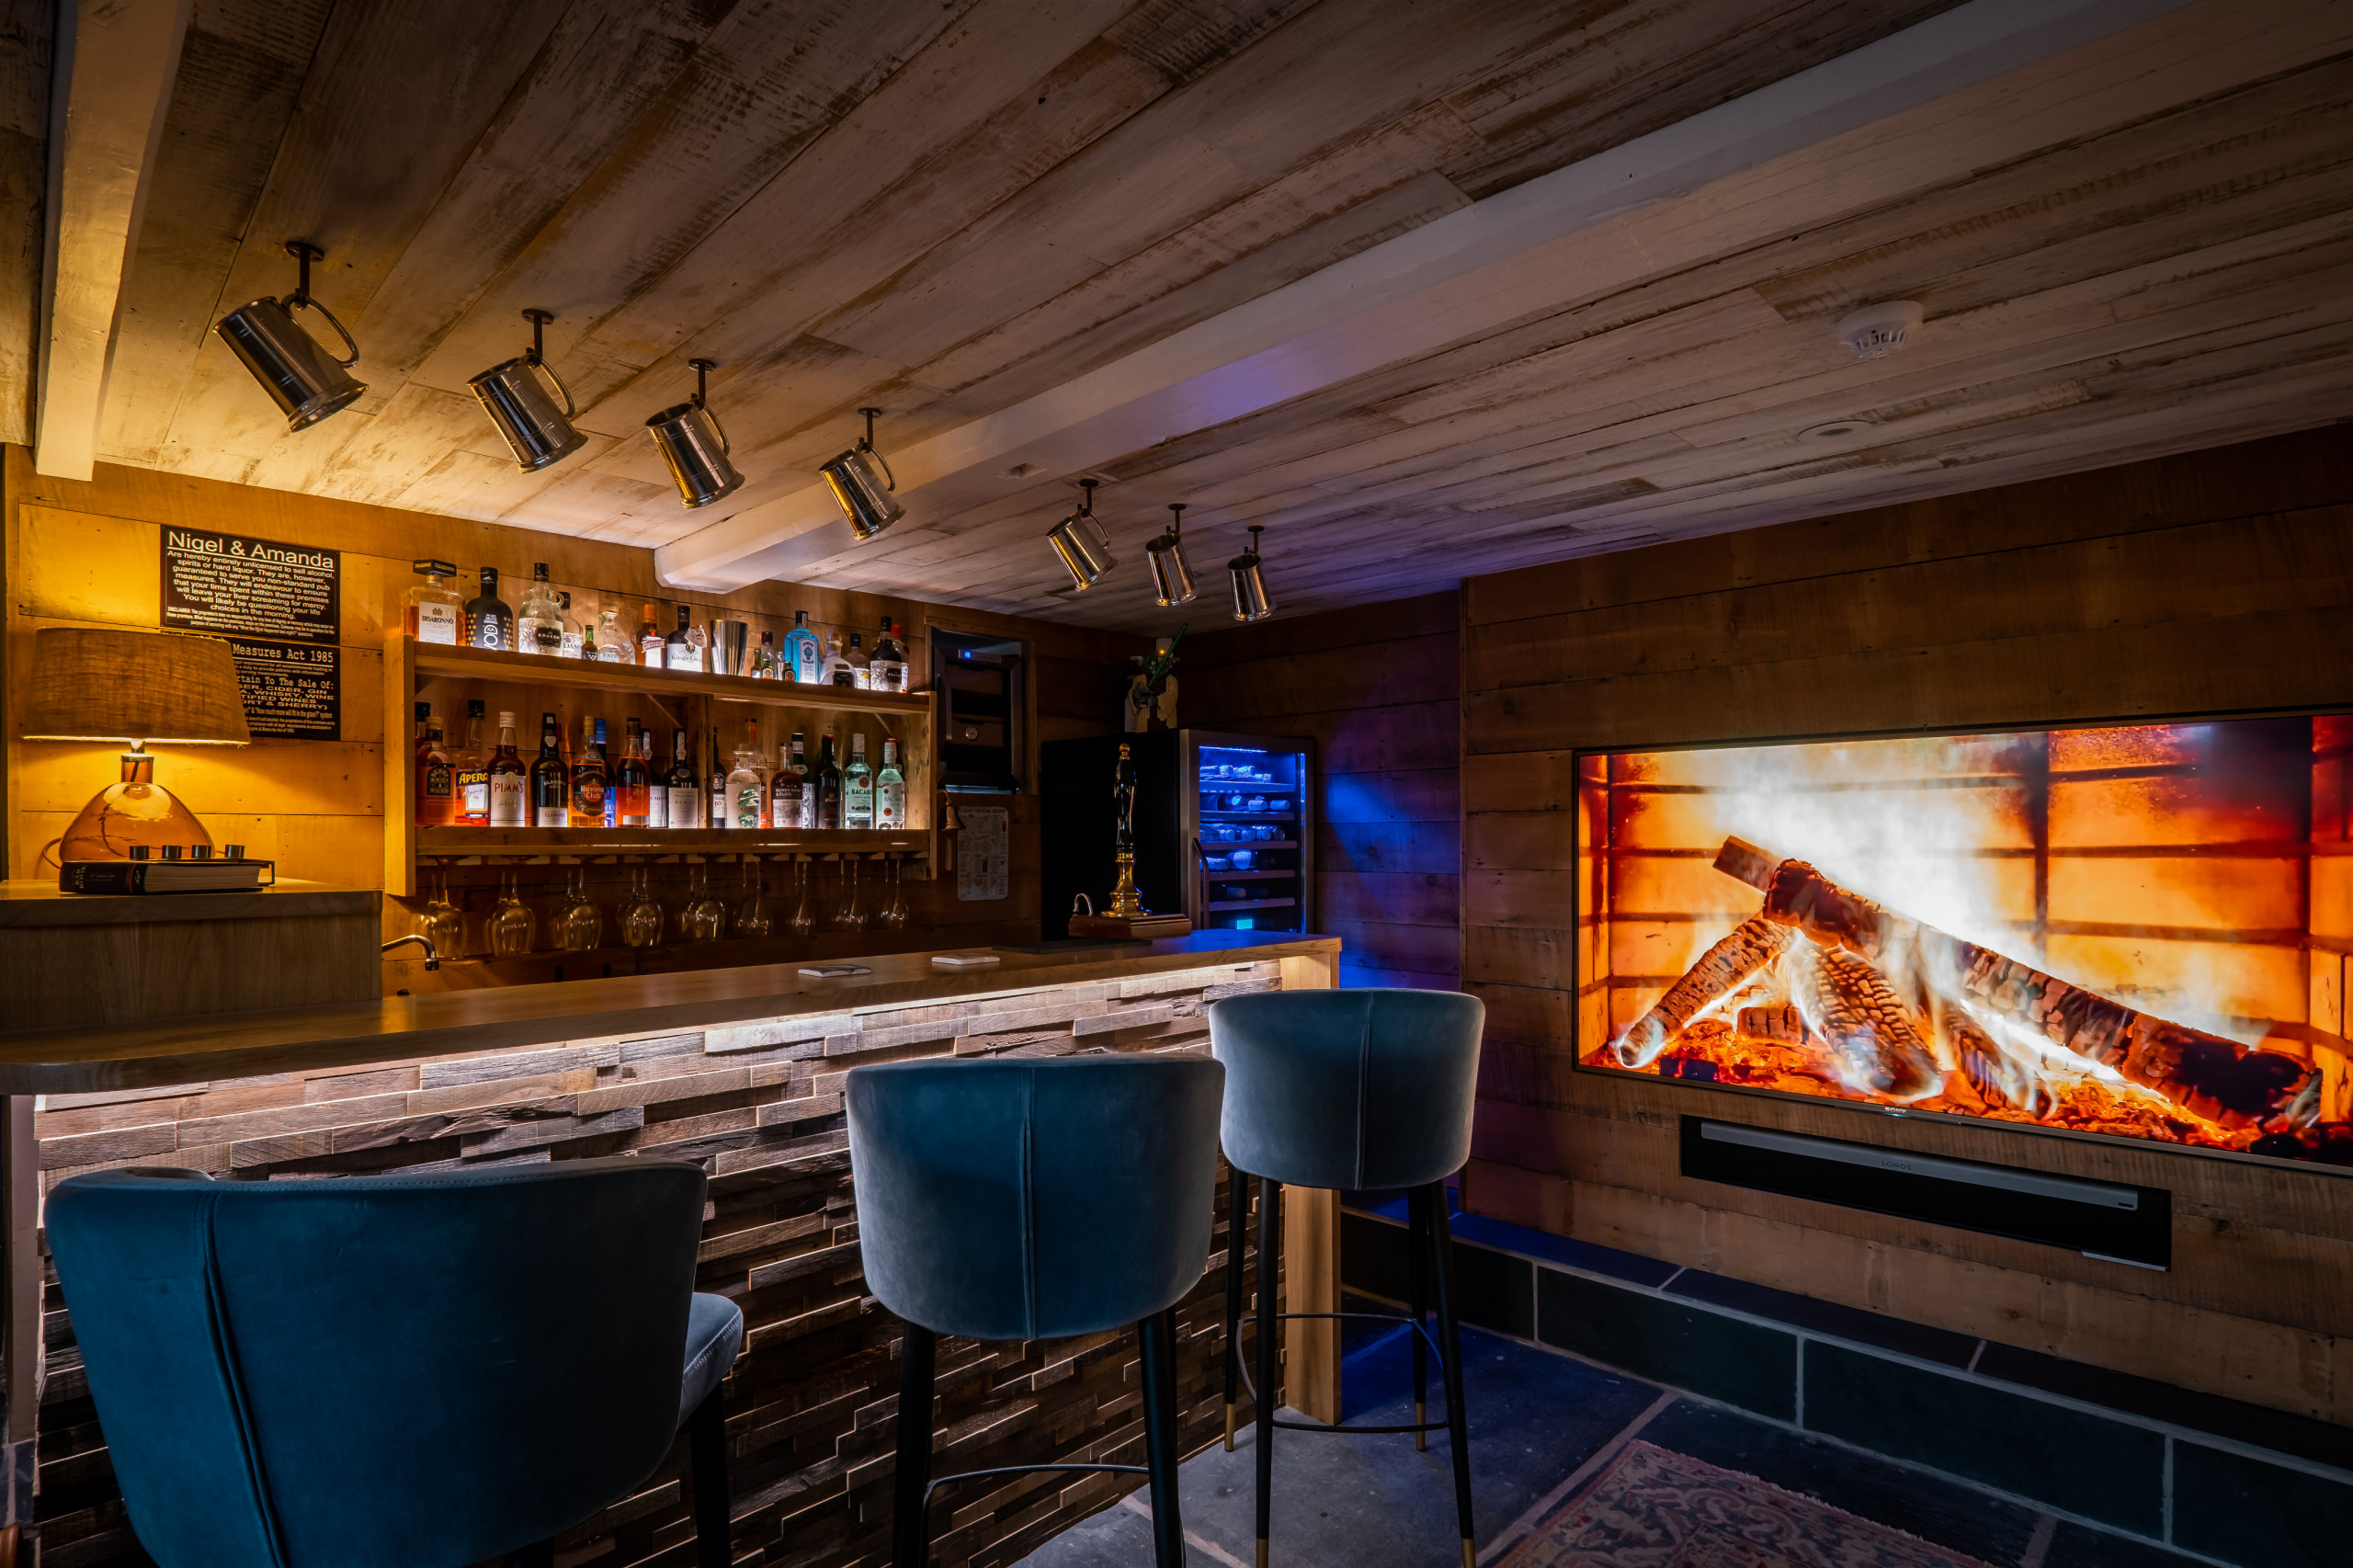 Smart home installation - Multi-room audio and TV distribution in a home bar